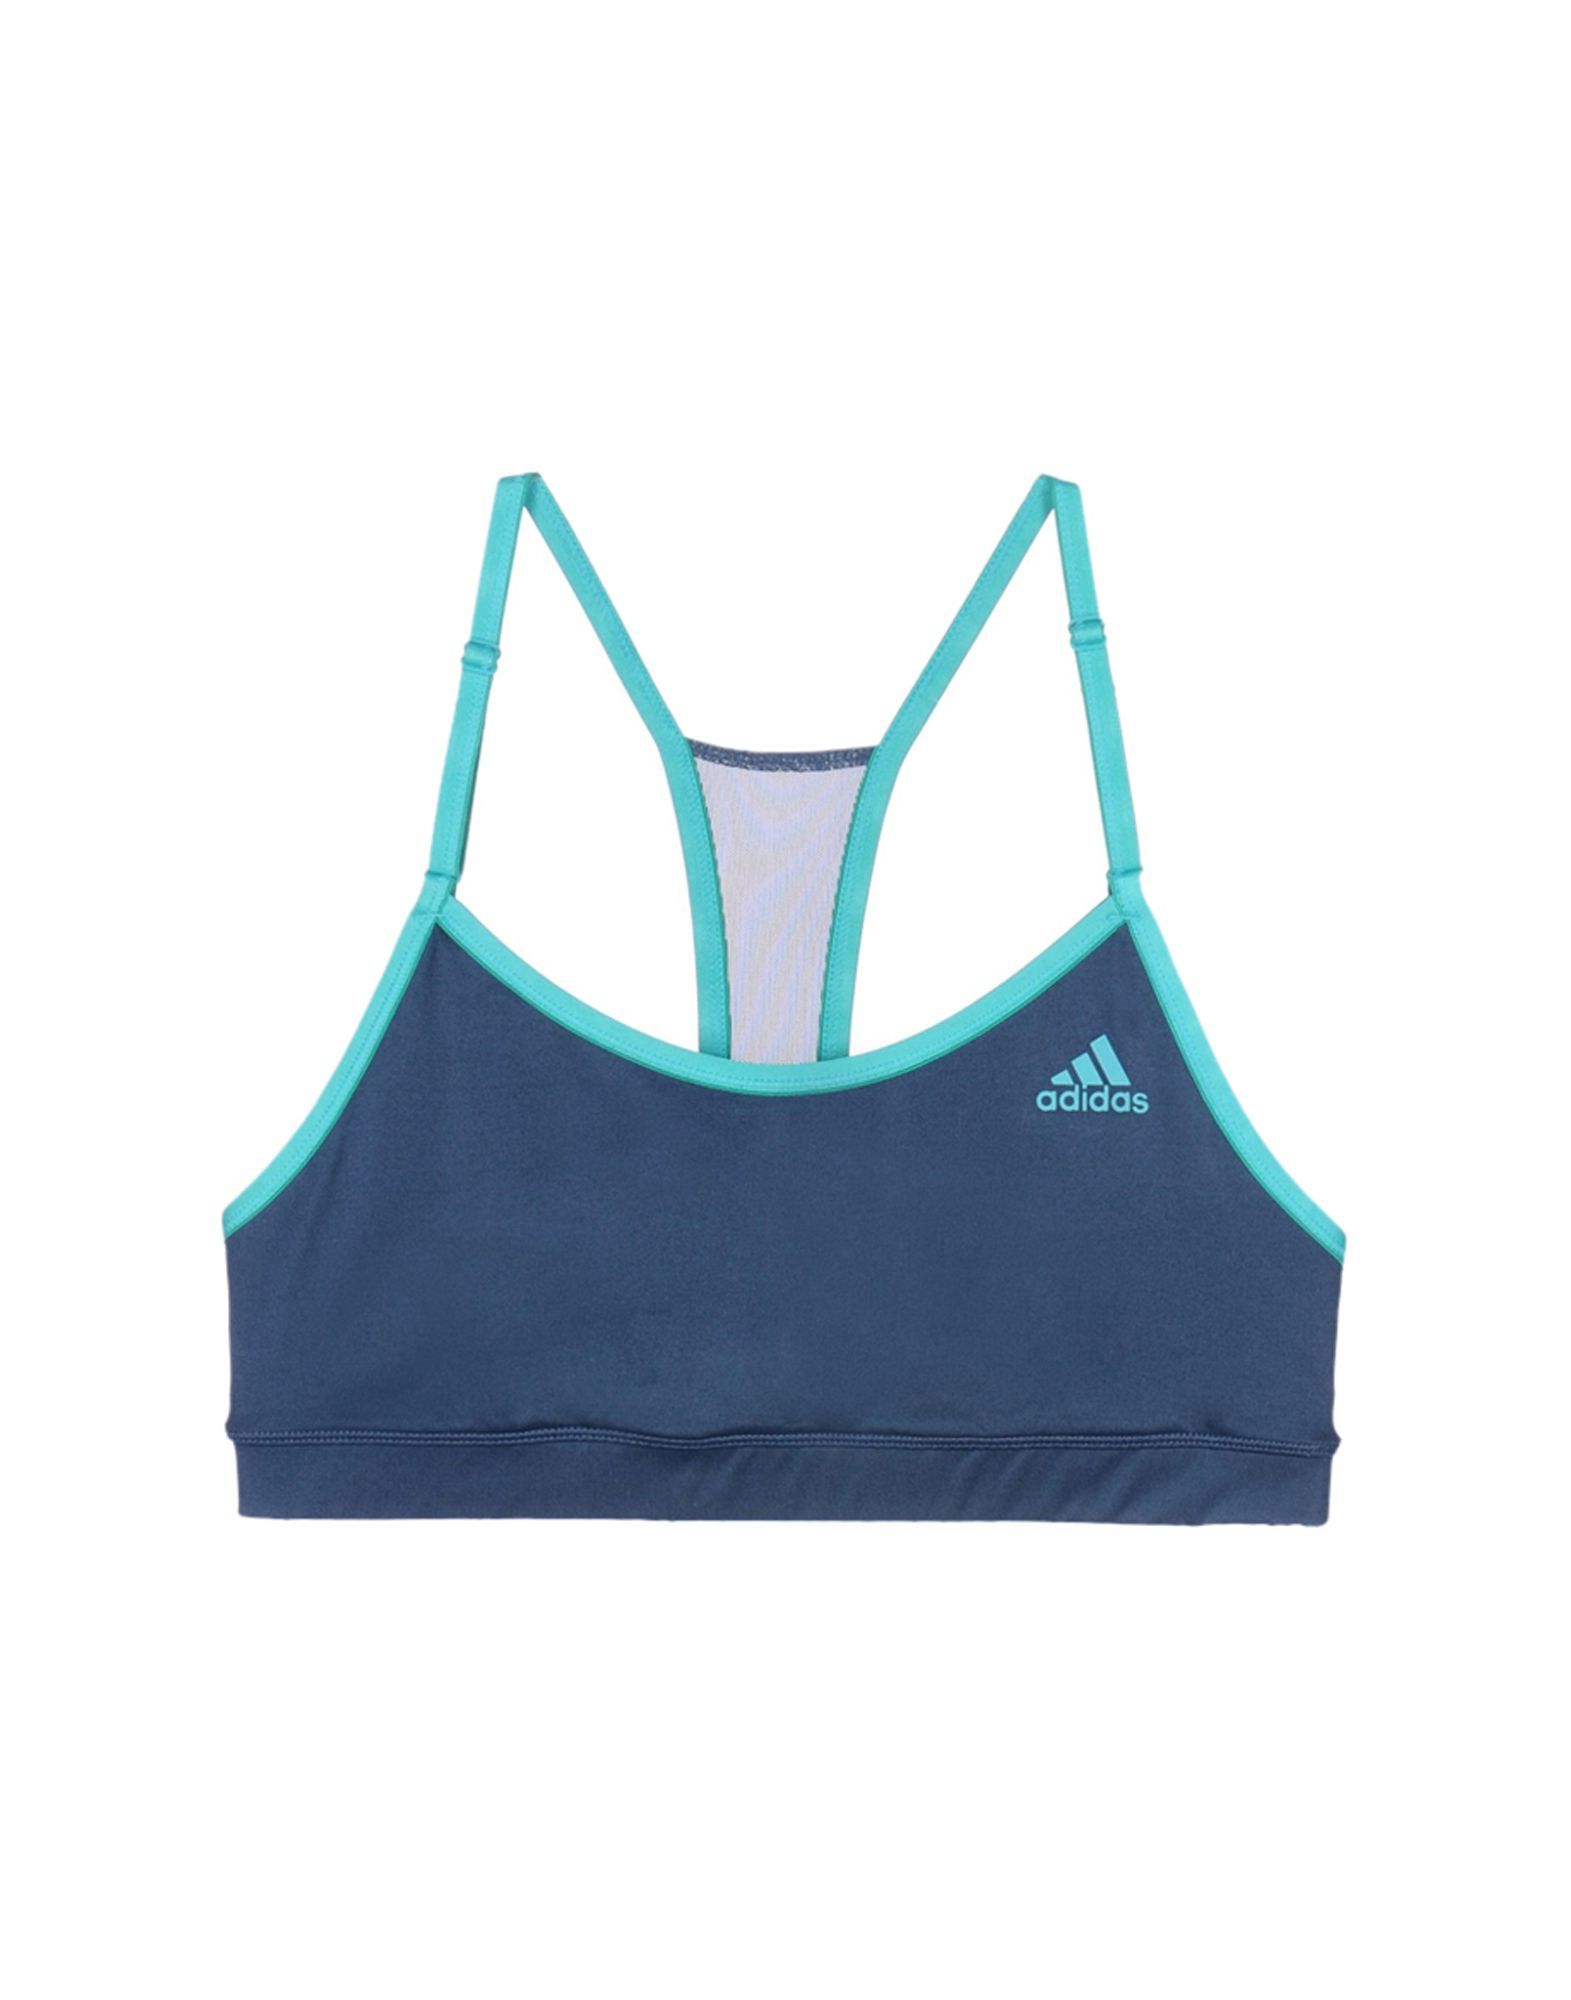 jersey, two-tone pattern, deep neckline, sleeveless, logo, stretch, removable padded lining, indoor training, small sized